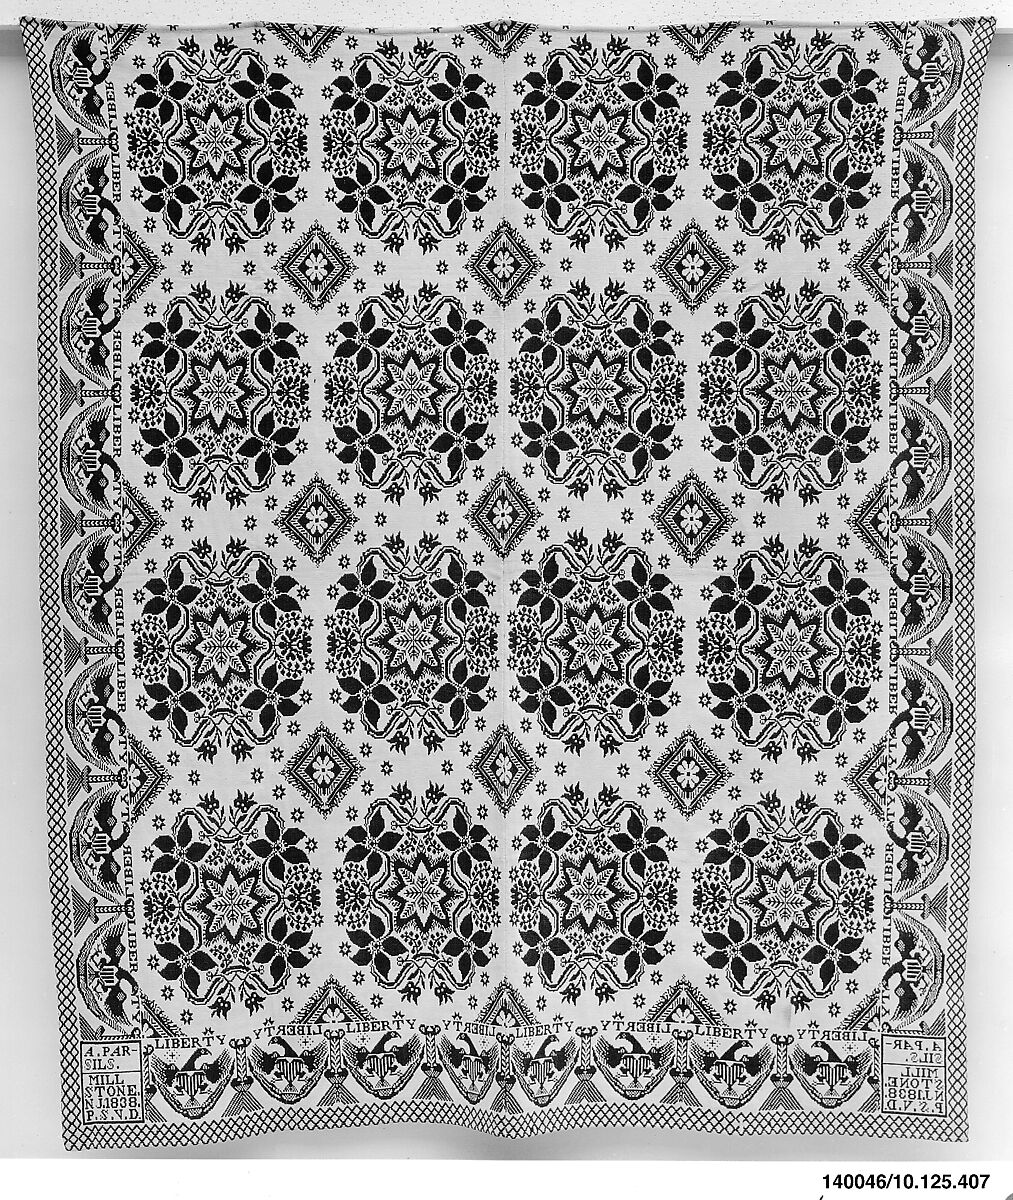 Coverlet, Lilies of France pattern with Eagle and Liberty borders, Peter Sutphen van Doren (1806–1899), Woven, cotton and wool, American 